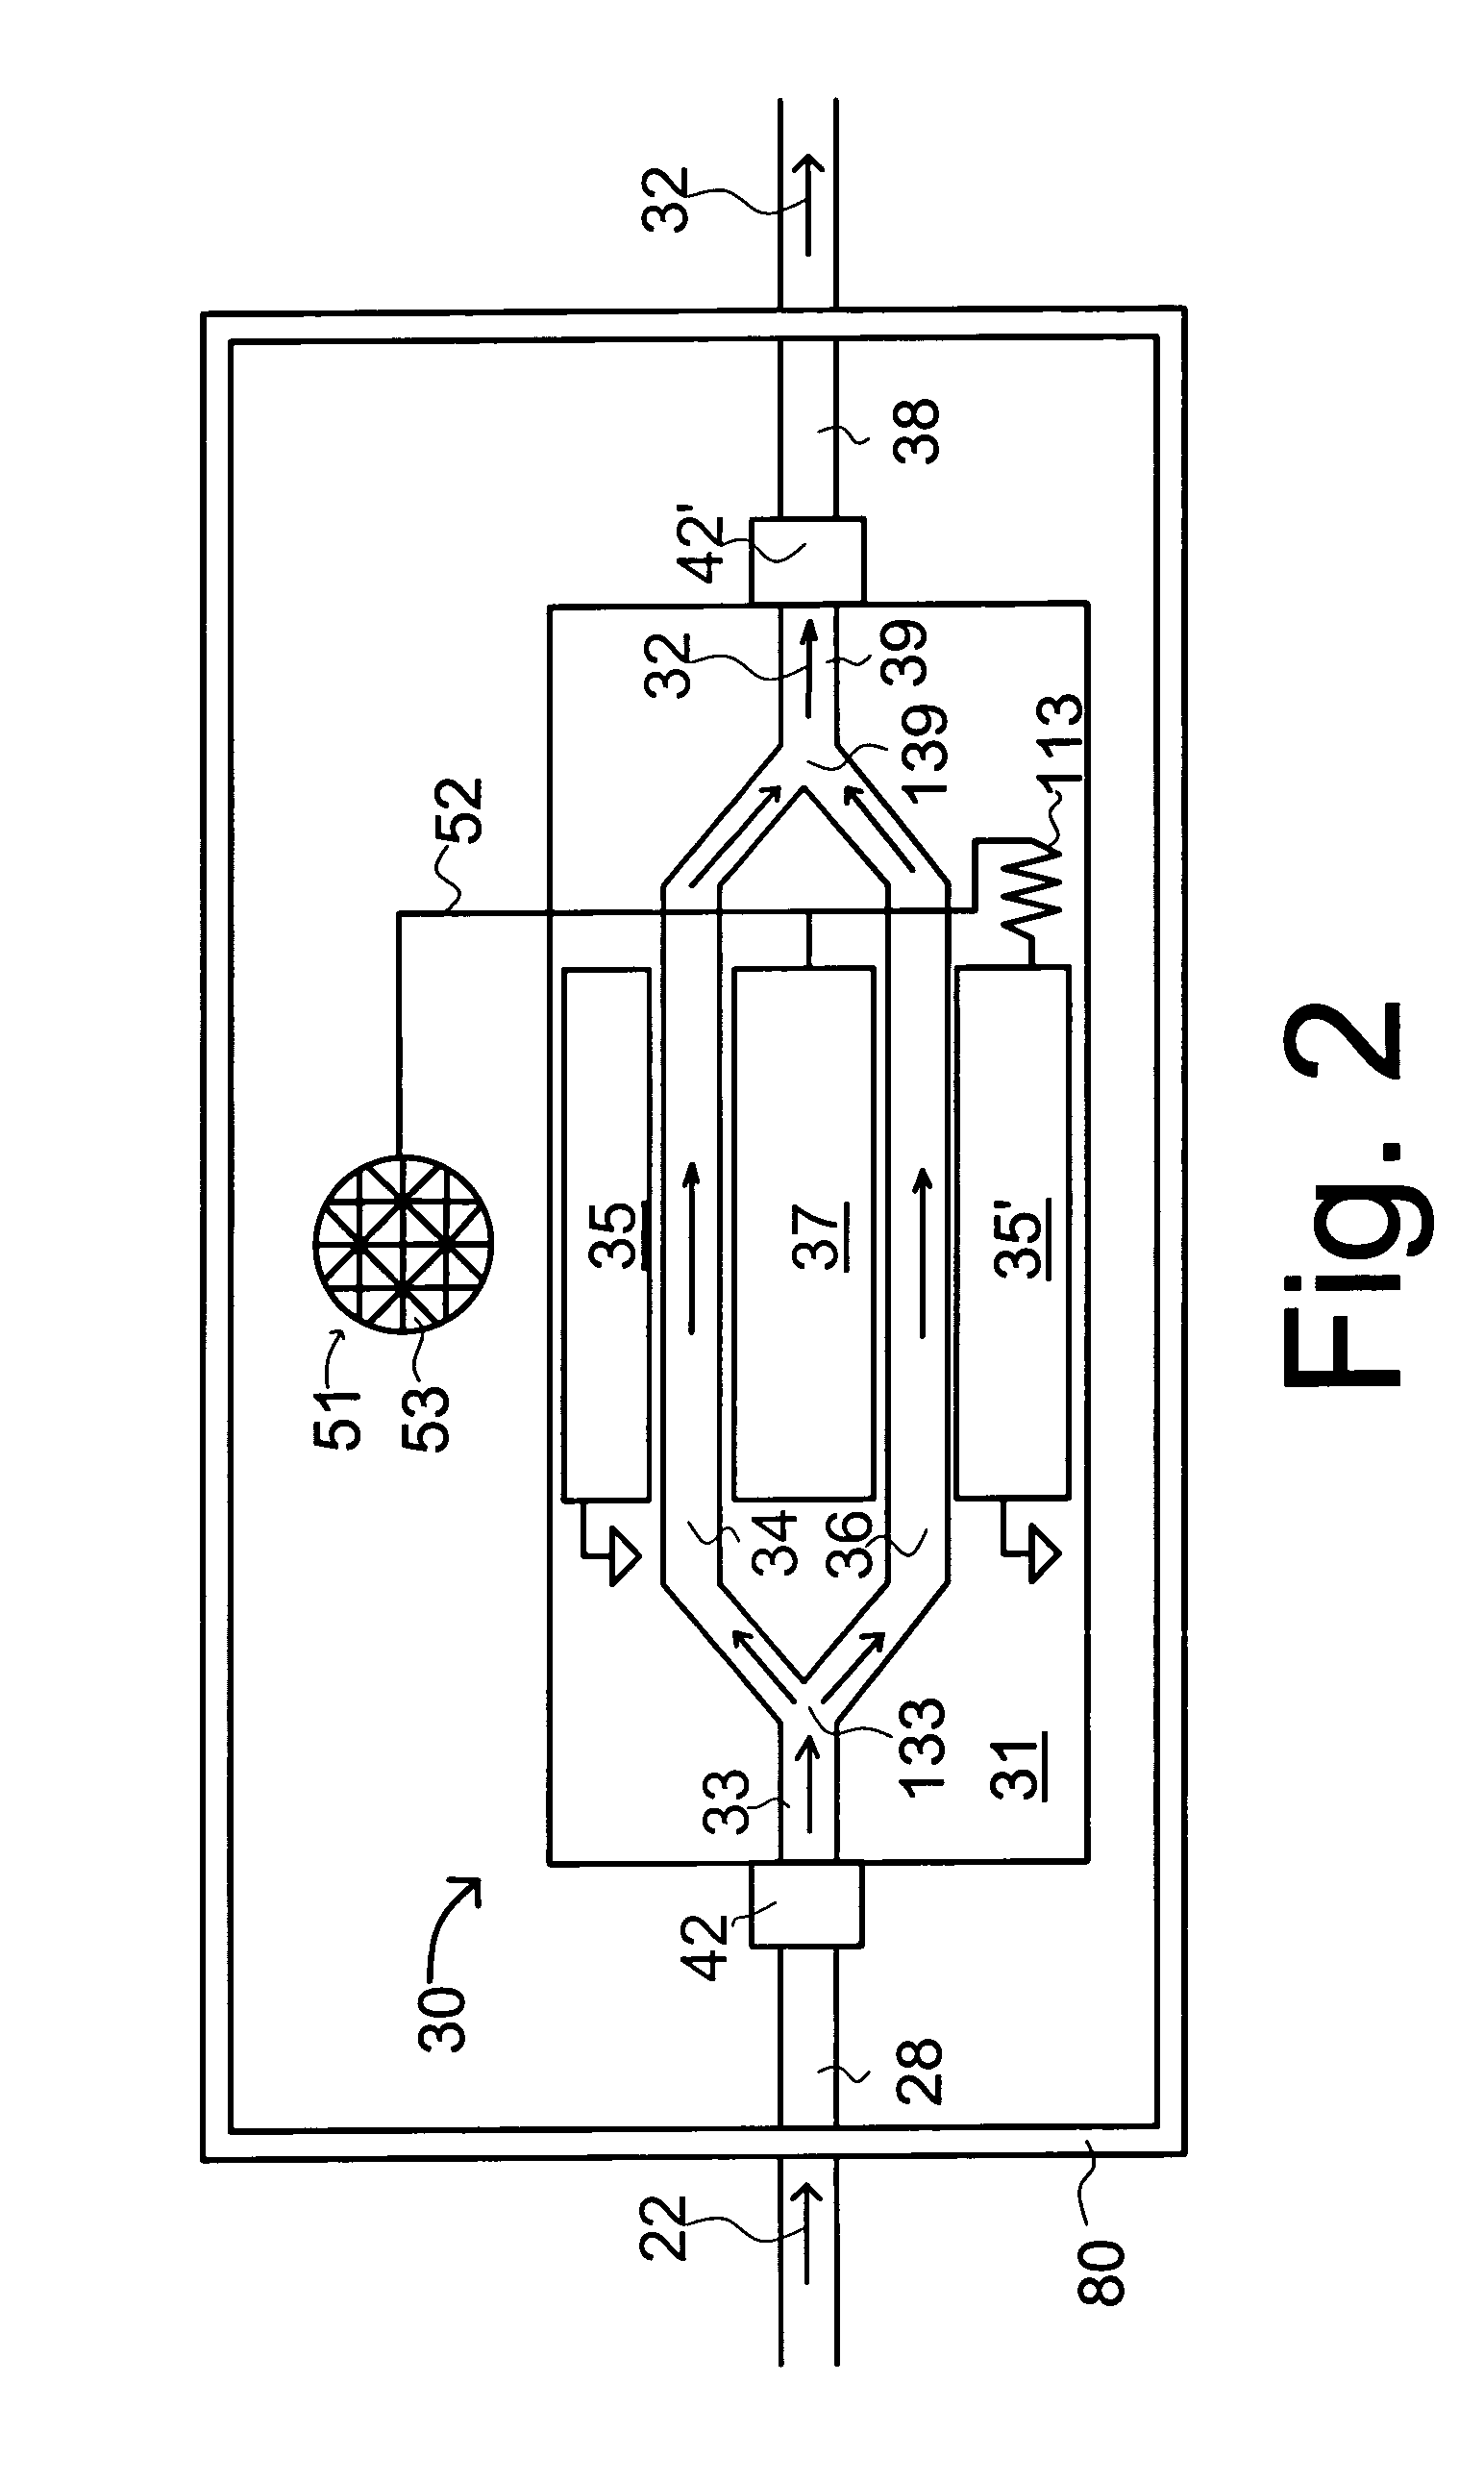 Method and apparatus for measuring electro-physiological activity